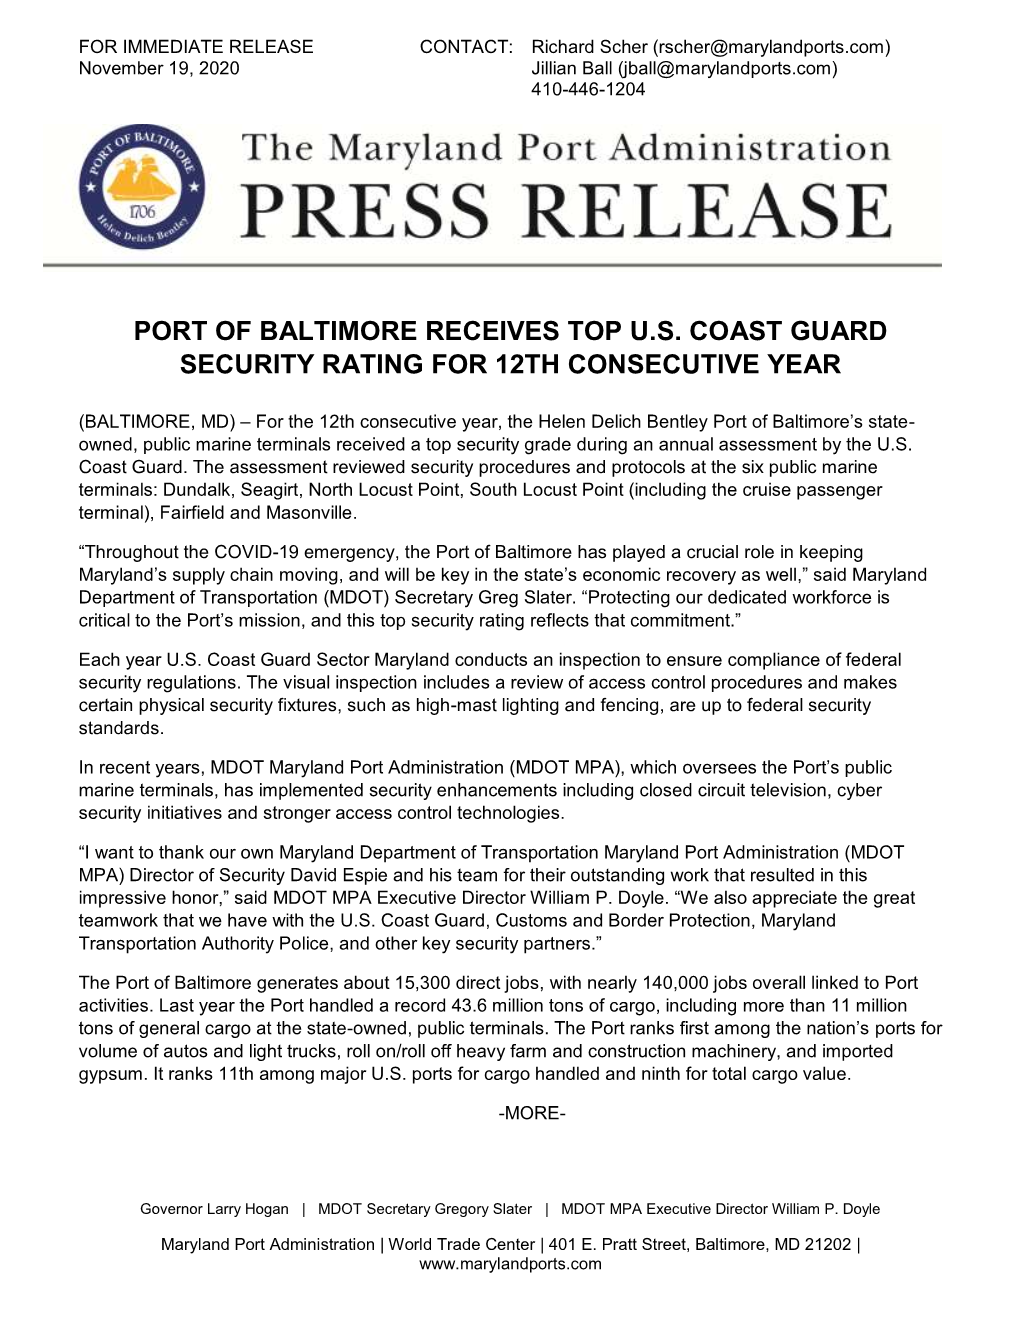 Port of Baltimore Receives Top U.S. Coast Guard Security Rating for 12Th Consecutive Year